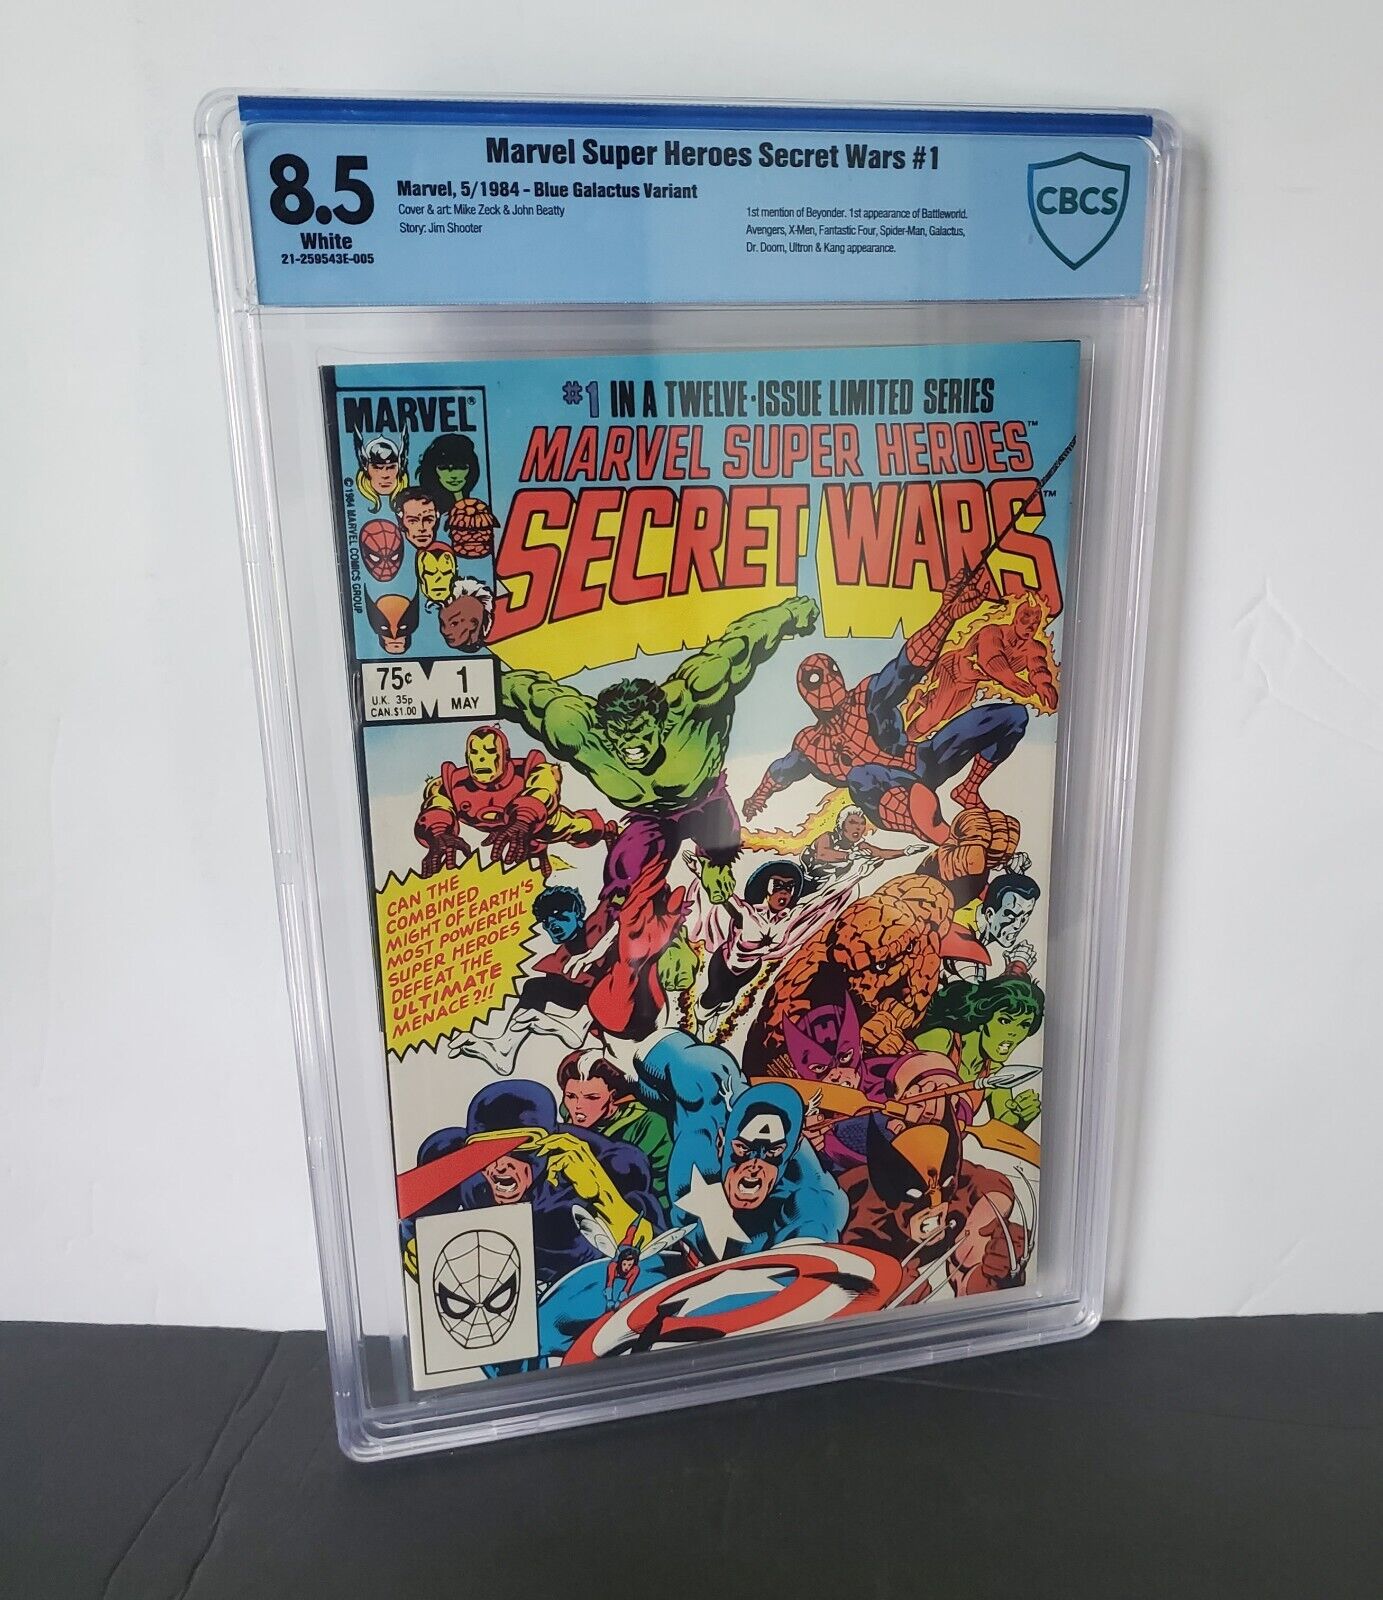 Marvel Super Heroes Secret Wars #1 May 1984. CBCS 8.5 White Pages M. Price Box.